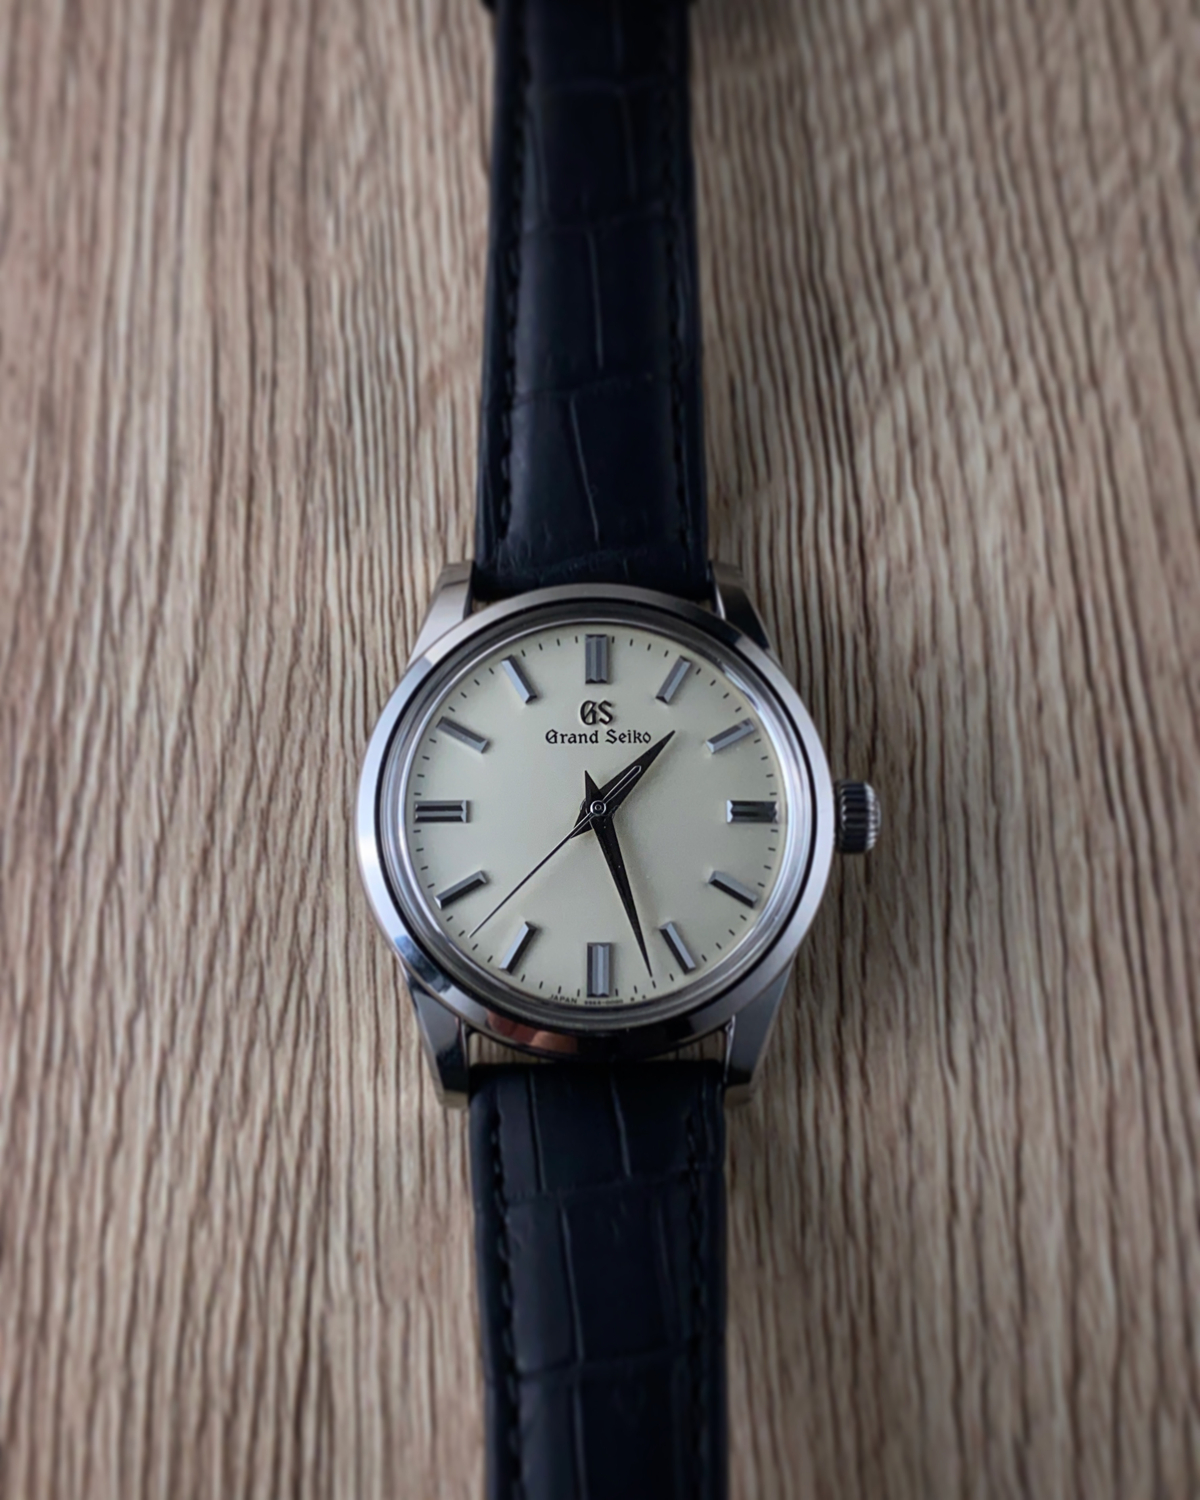 Owner review: Grand Seiko SBGW231 - FIFTH WRIST